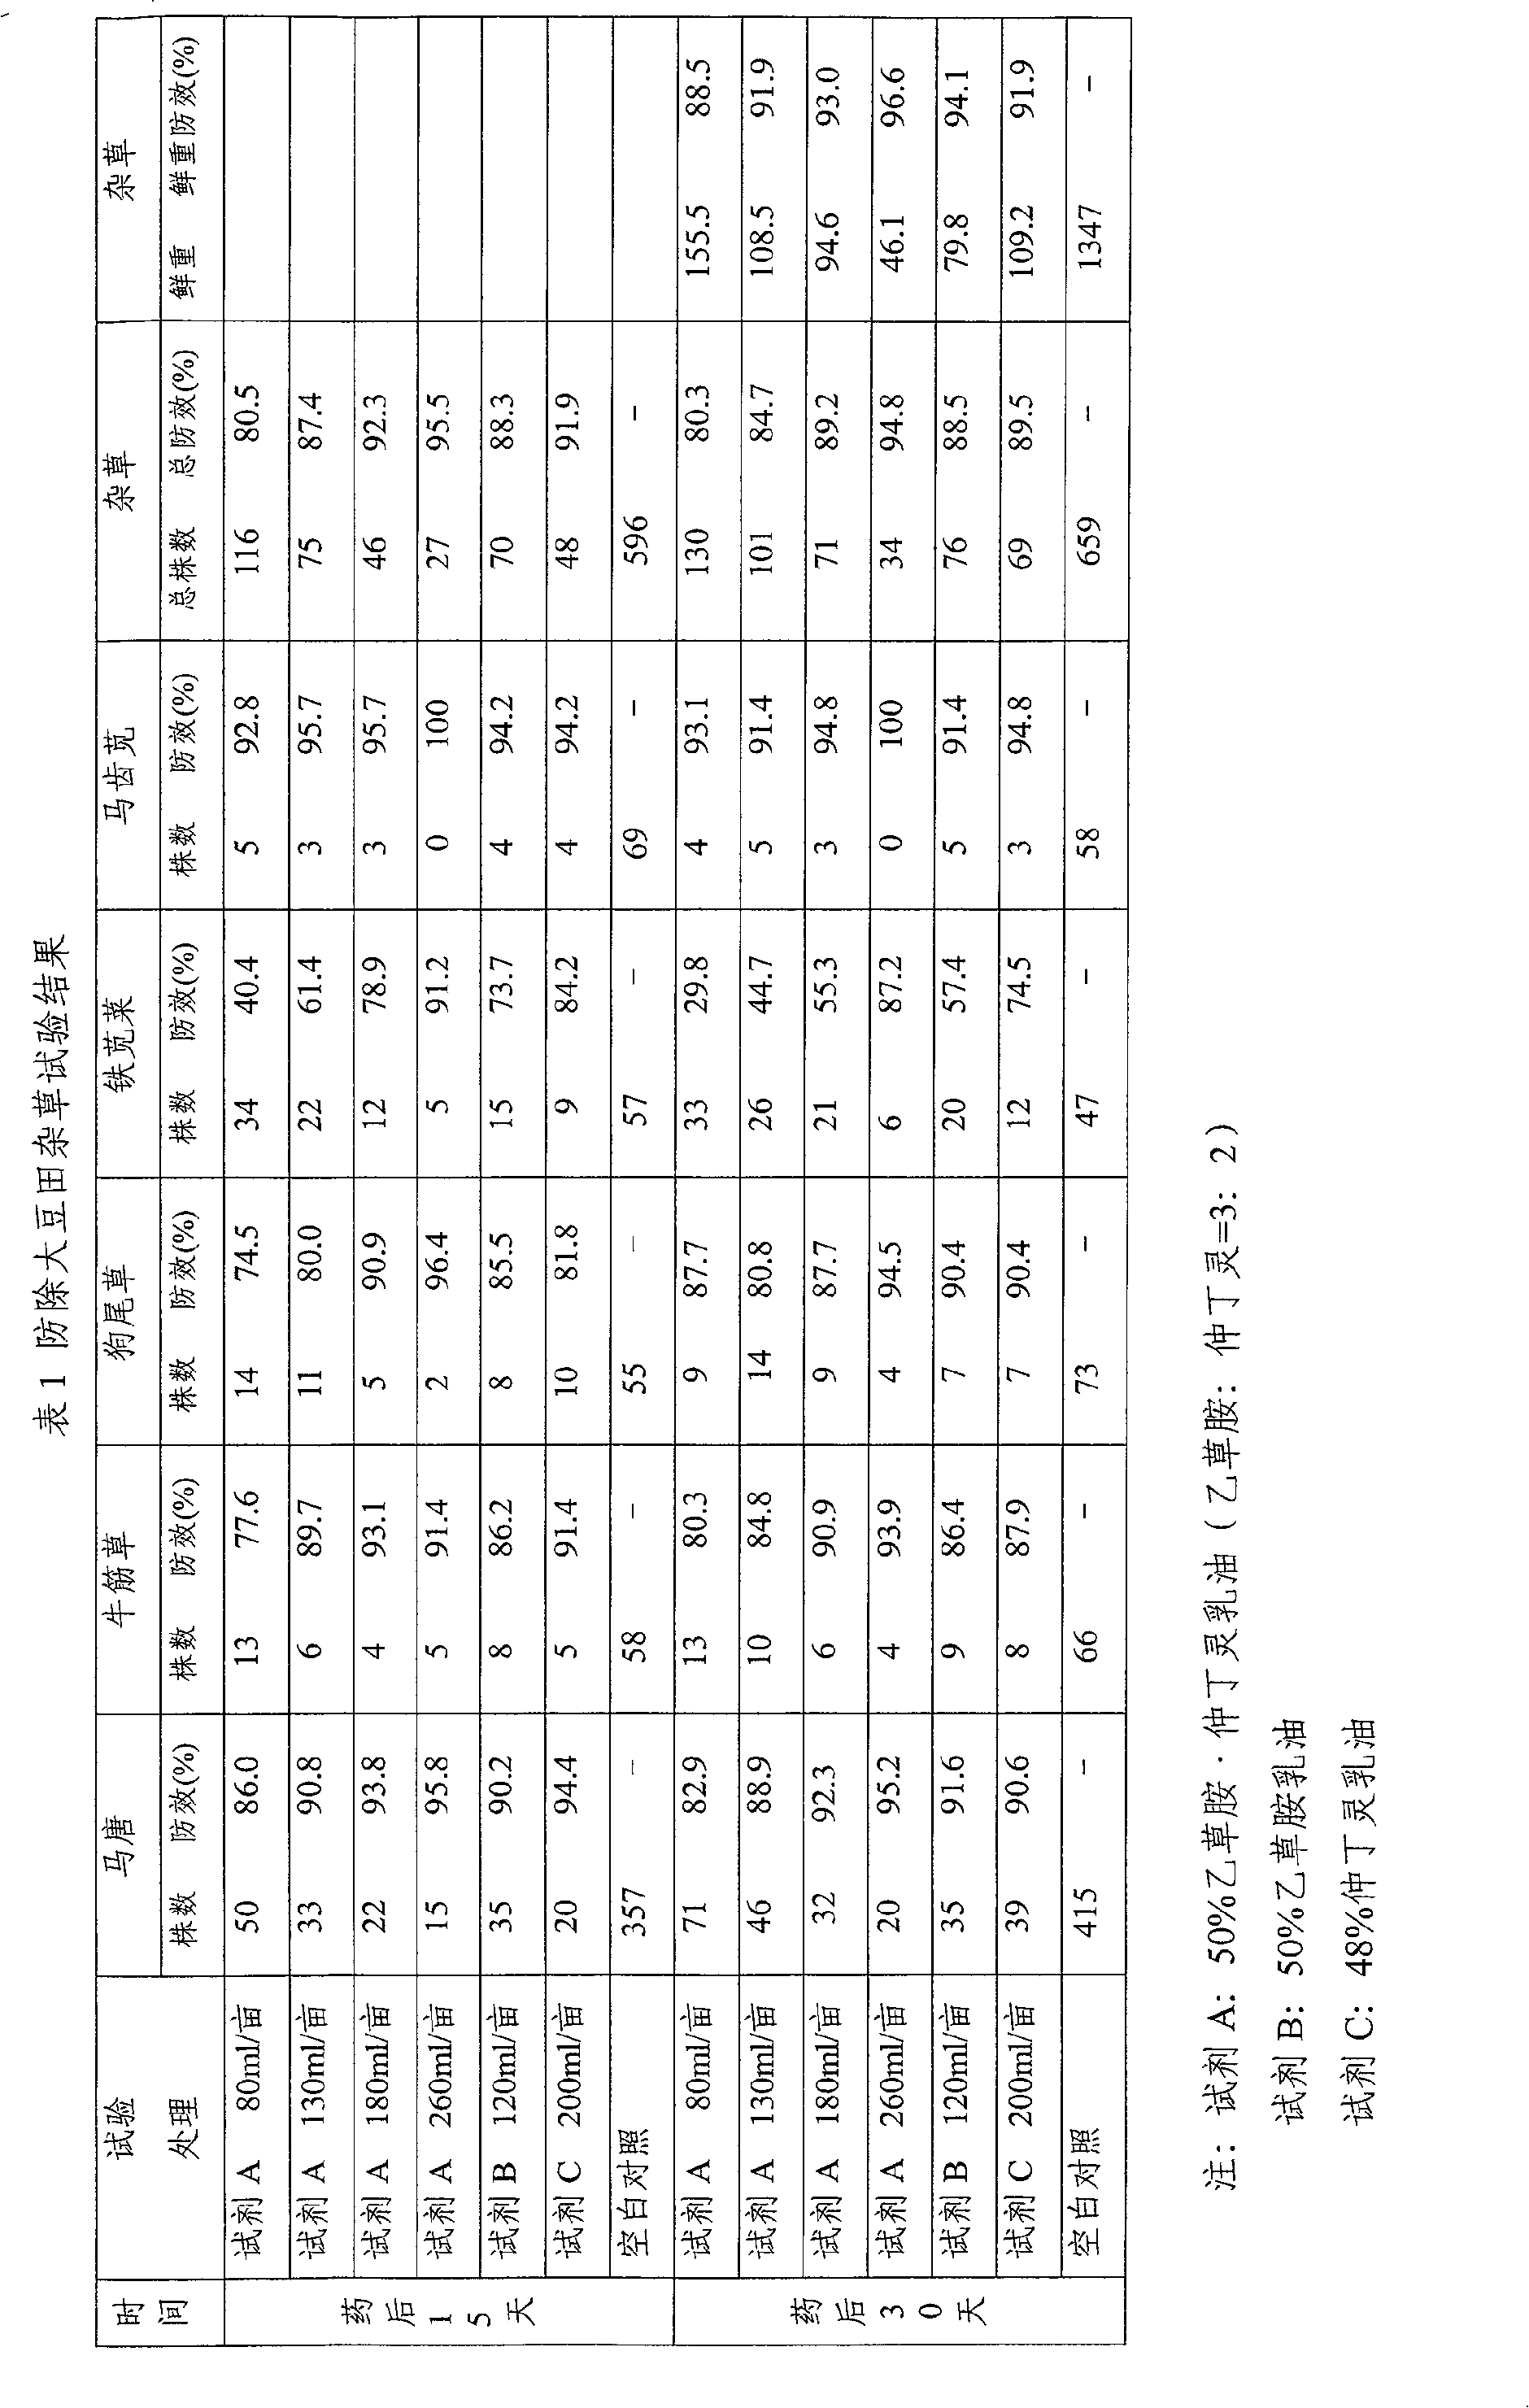 Herbicide composition containing acetochlor and butralin